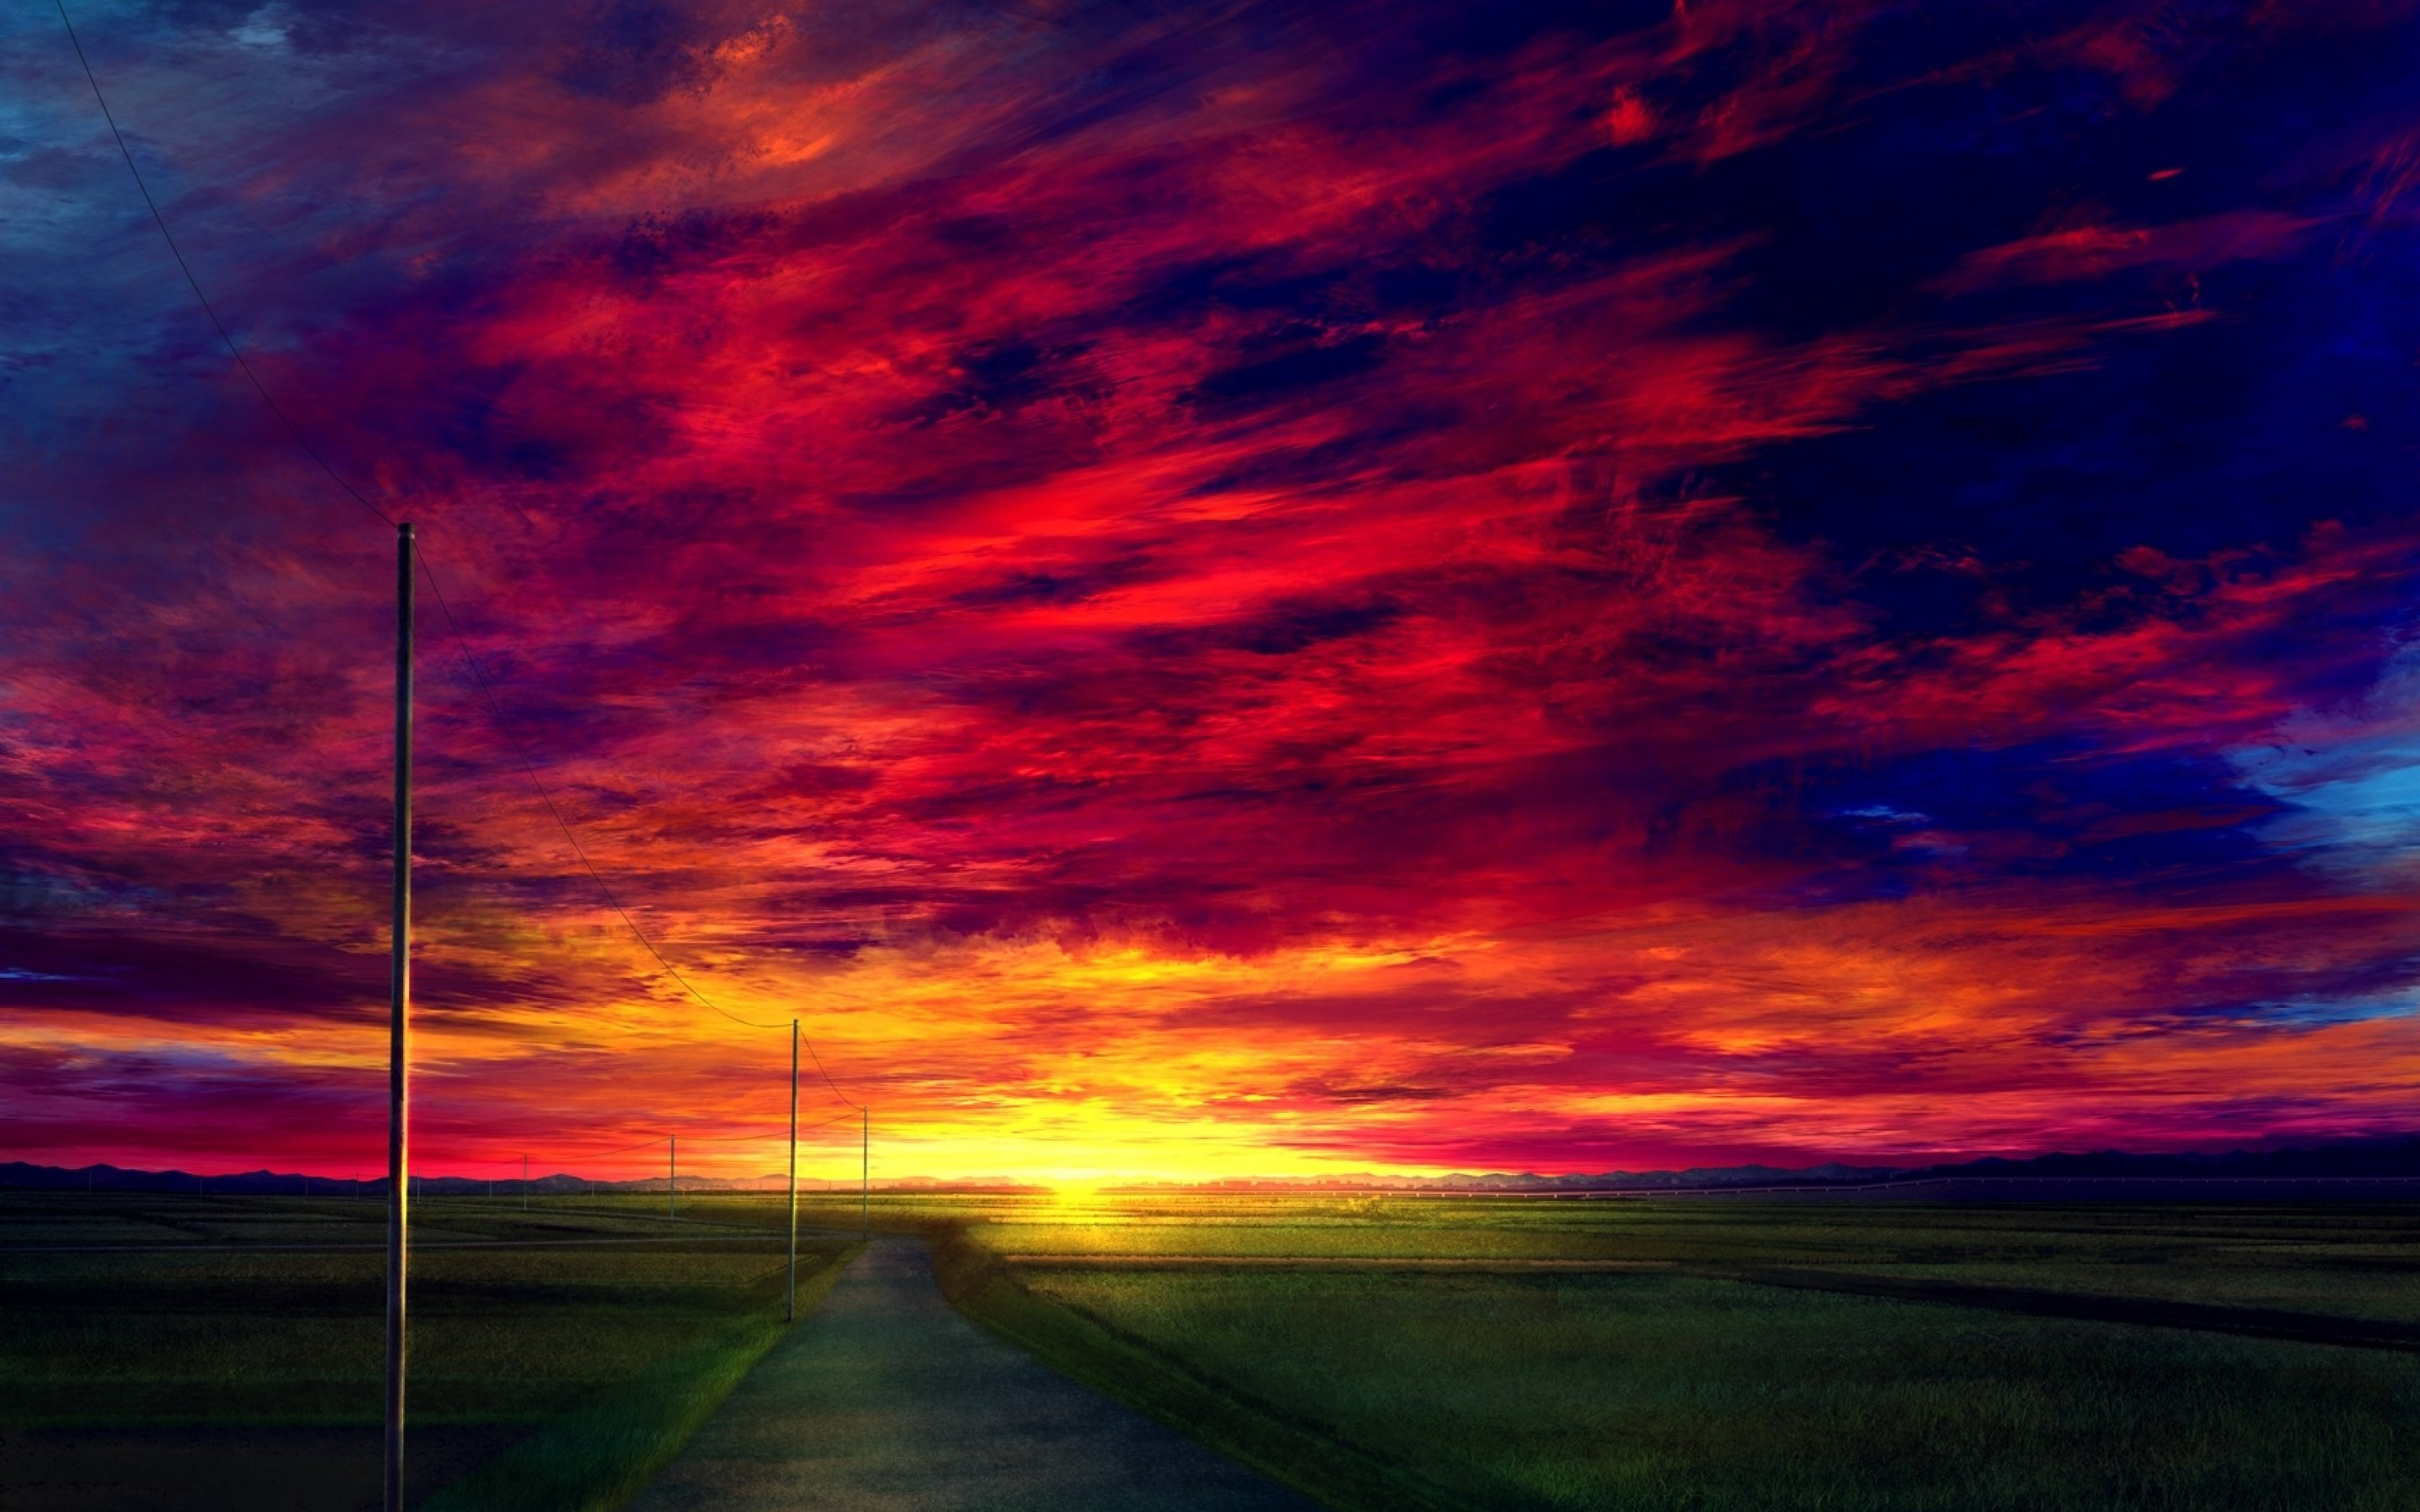 Download 2880x1800 Anime Landscape, Sunset, Red Sky, Realistic, Field, Scenic Wallpaper for MacBook Pro 15 inch